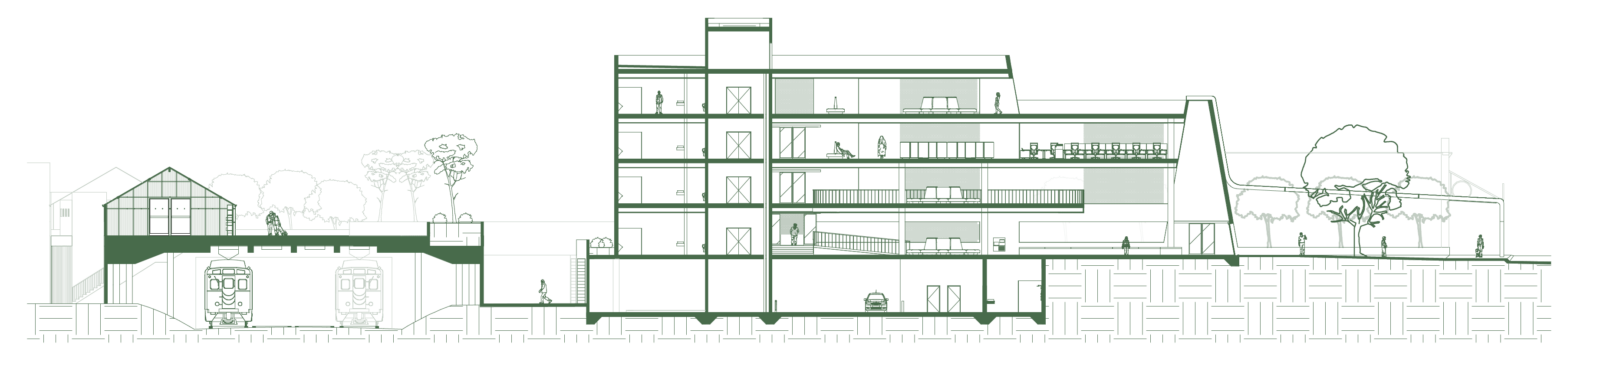 Cross-section showing the proposed building, and its relationship to the existing surrounds and streets.